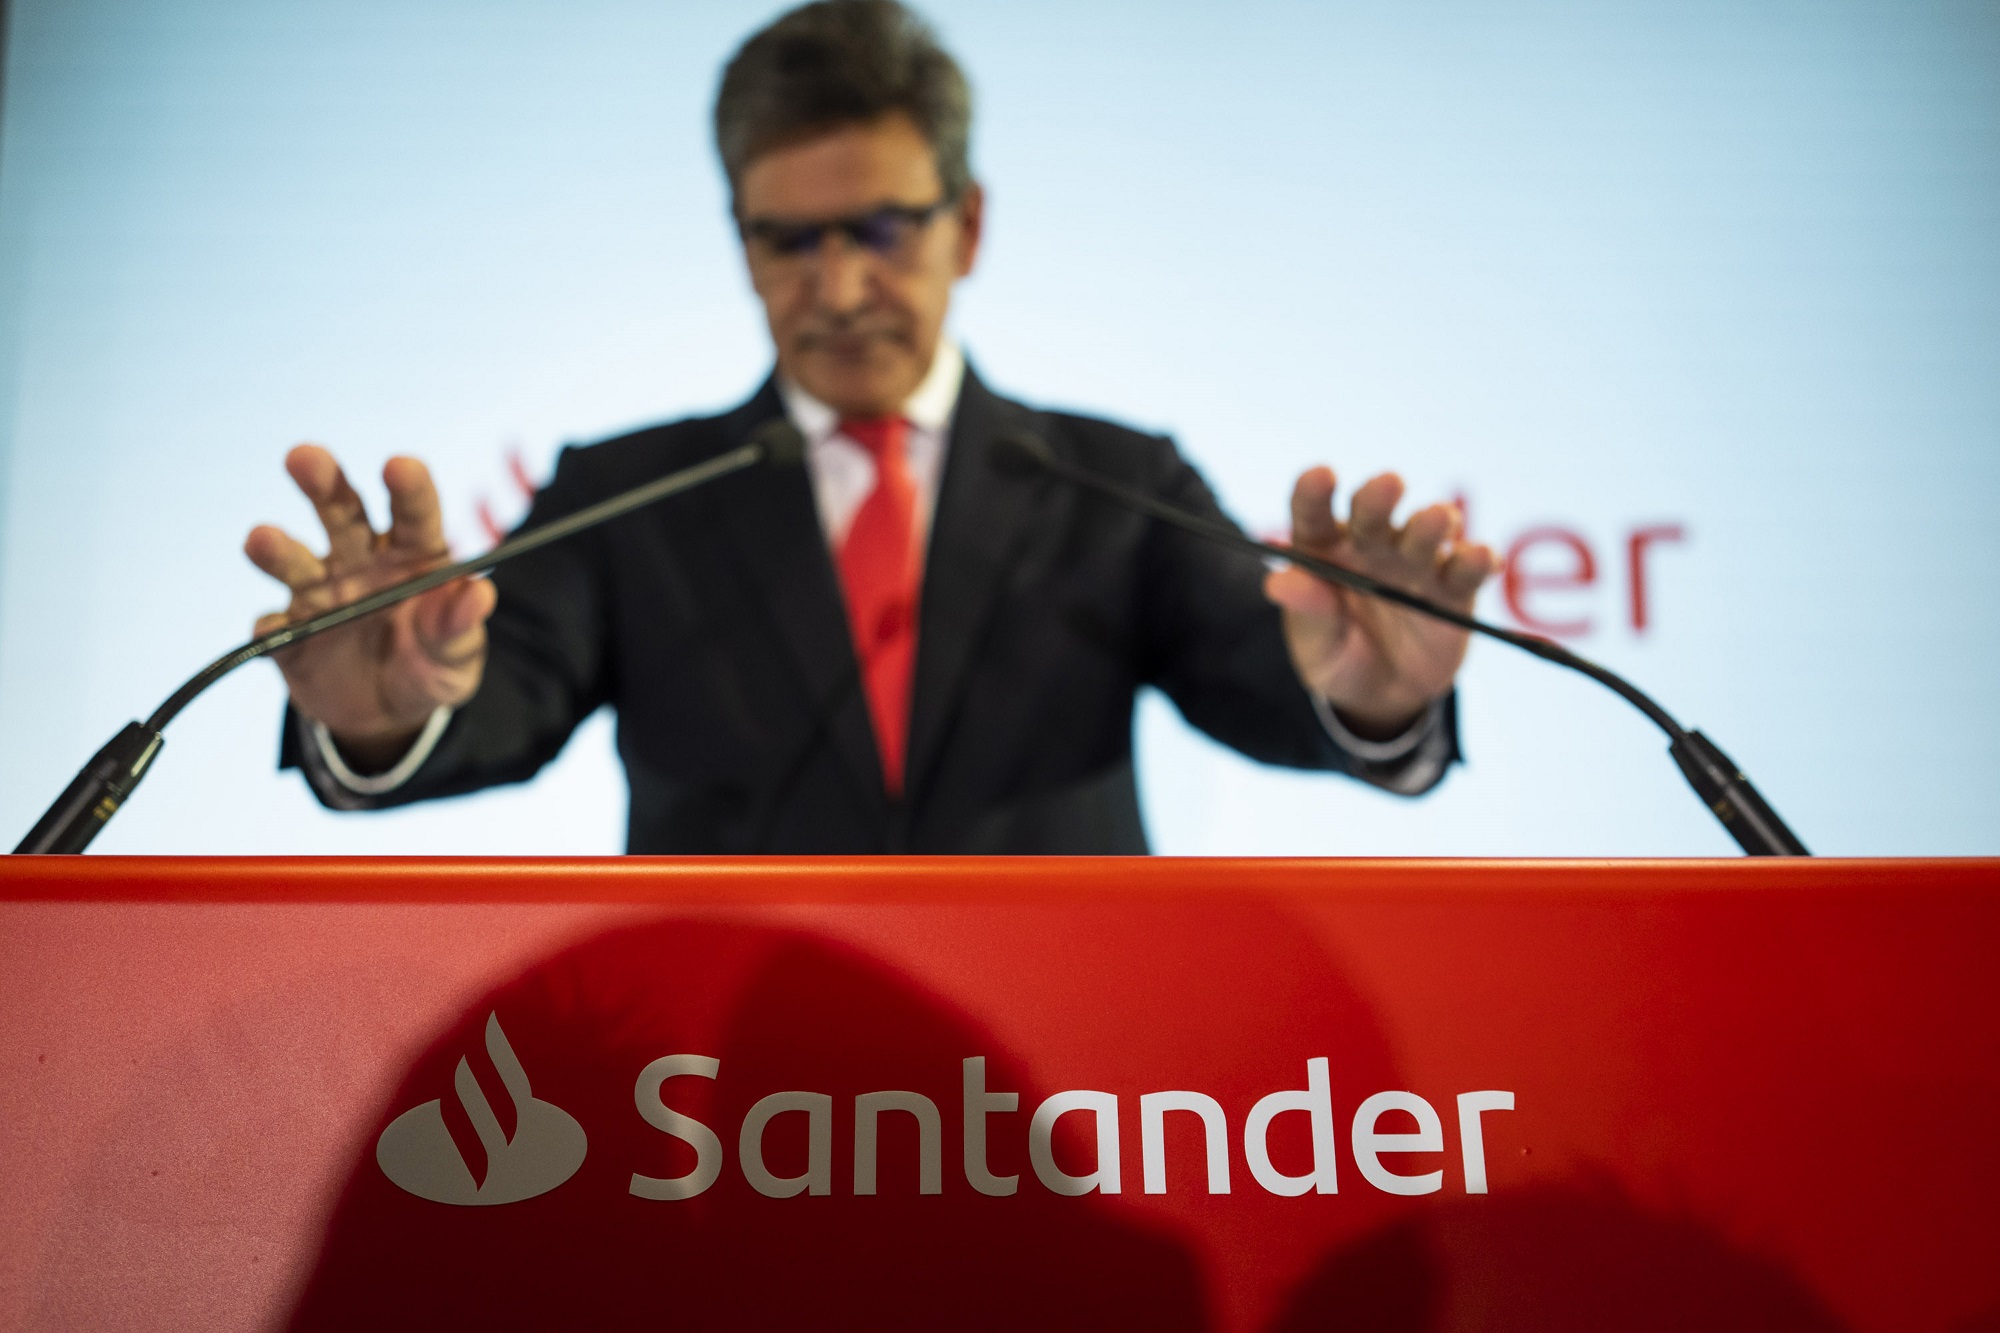 This giant Spanish bank has just managed to infuriate many of its investors.